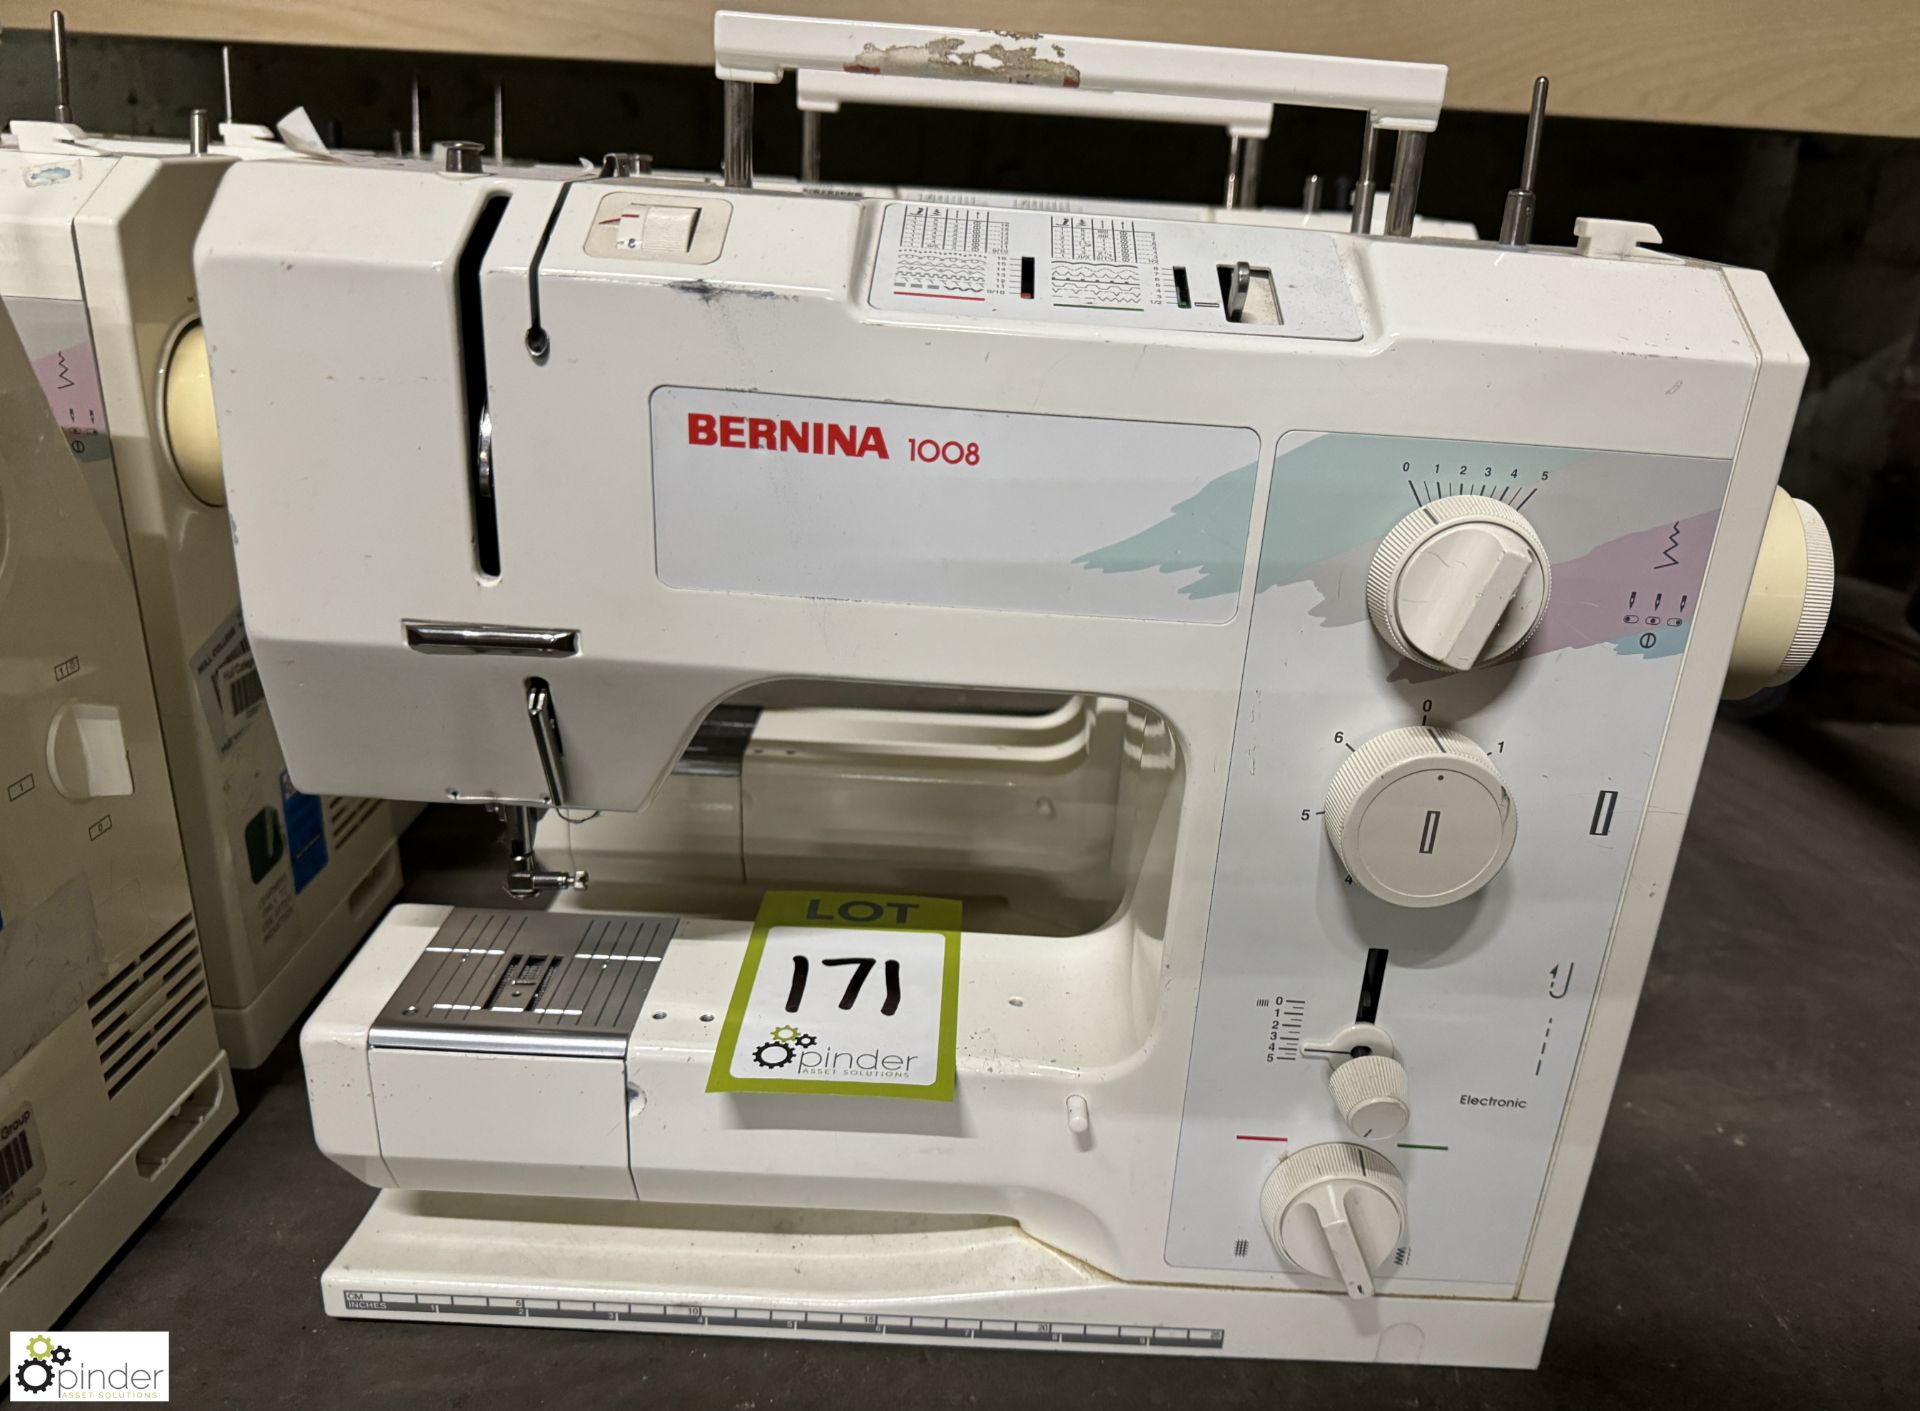 2 Bermina 1008 Domestic Lockstitch Sewing Machines, 240volts (no power leads or foot controls) - Image 3 of 4